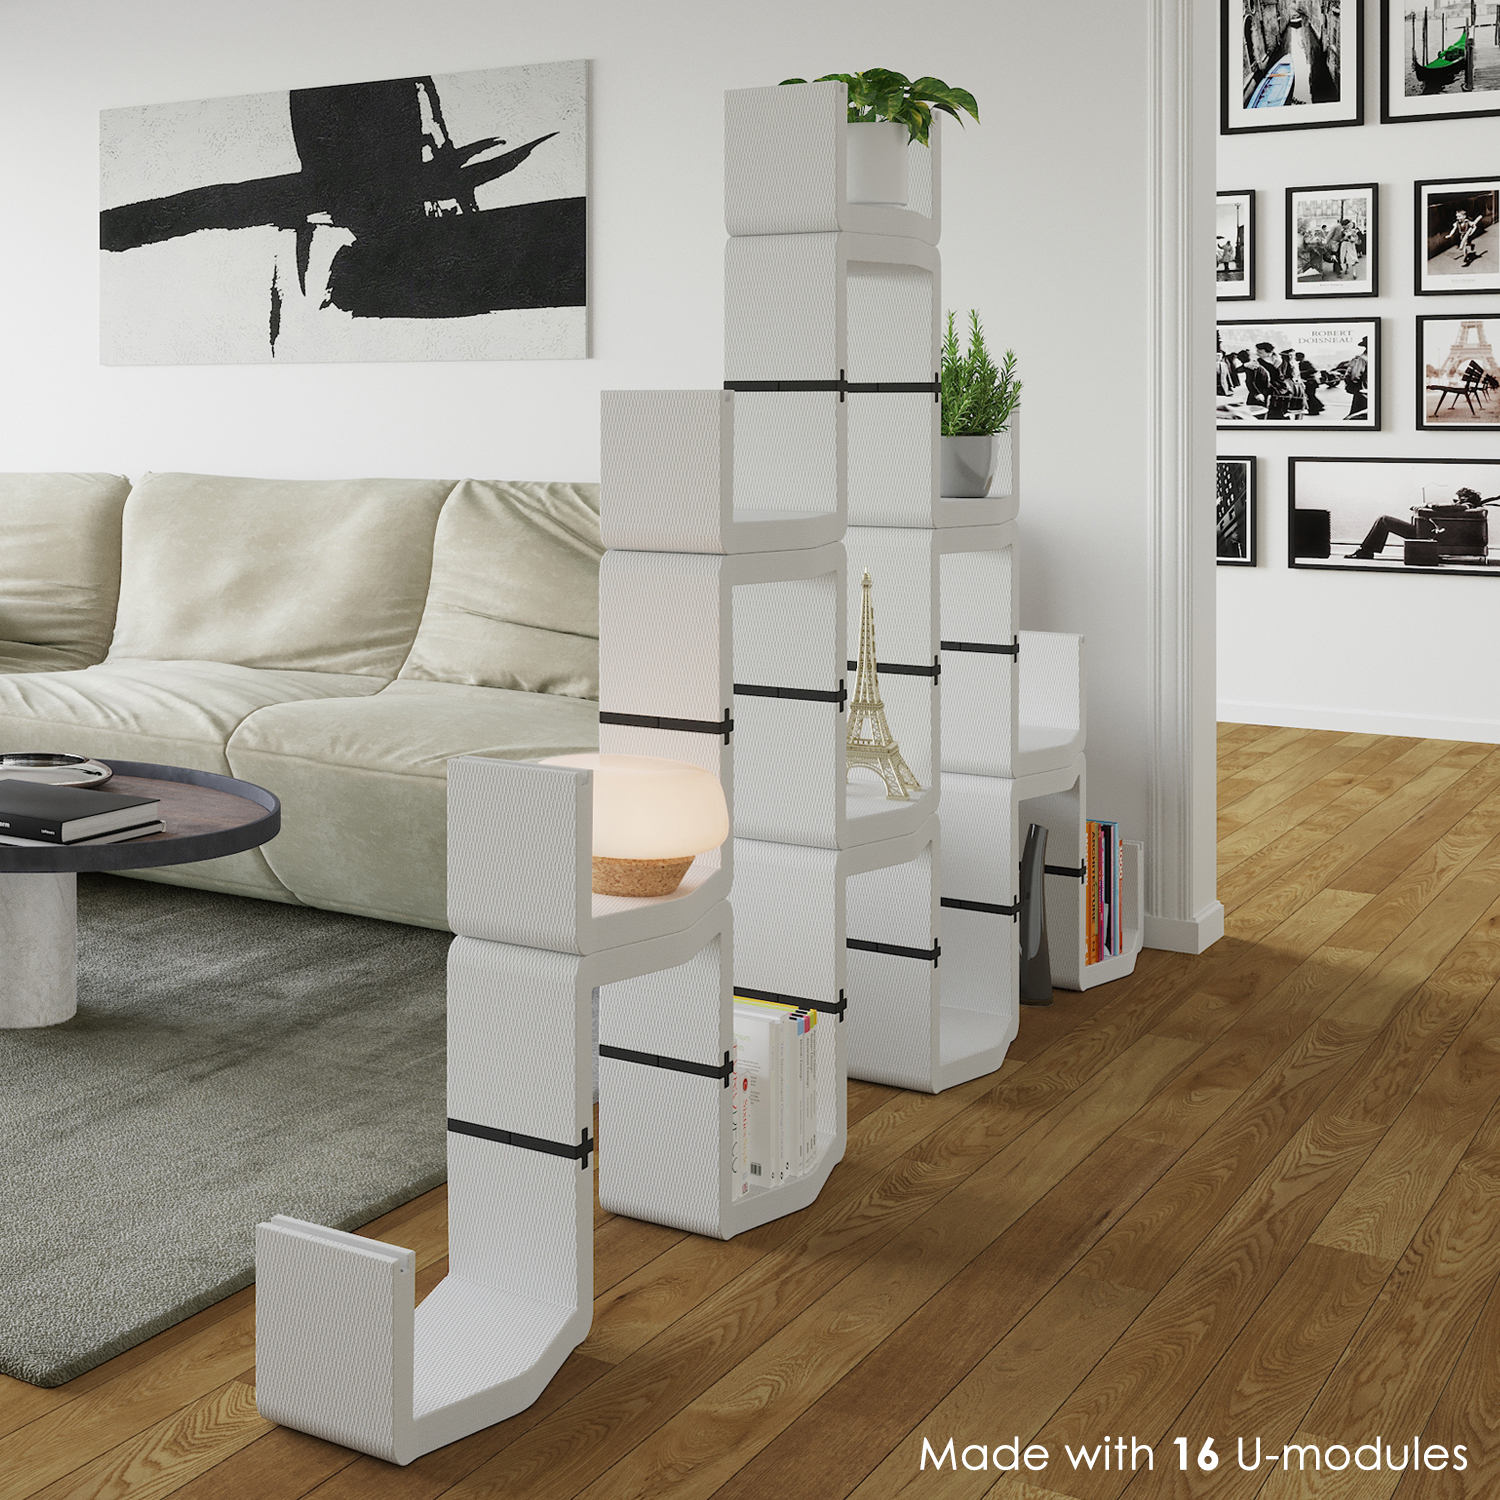 Modular Bookcases And Standing Shelves Wall Shelves And Ledges